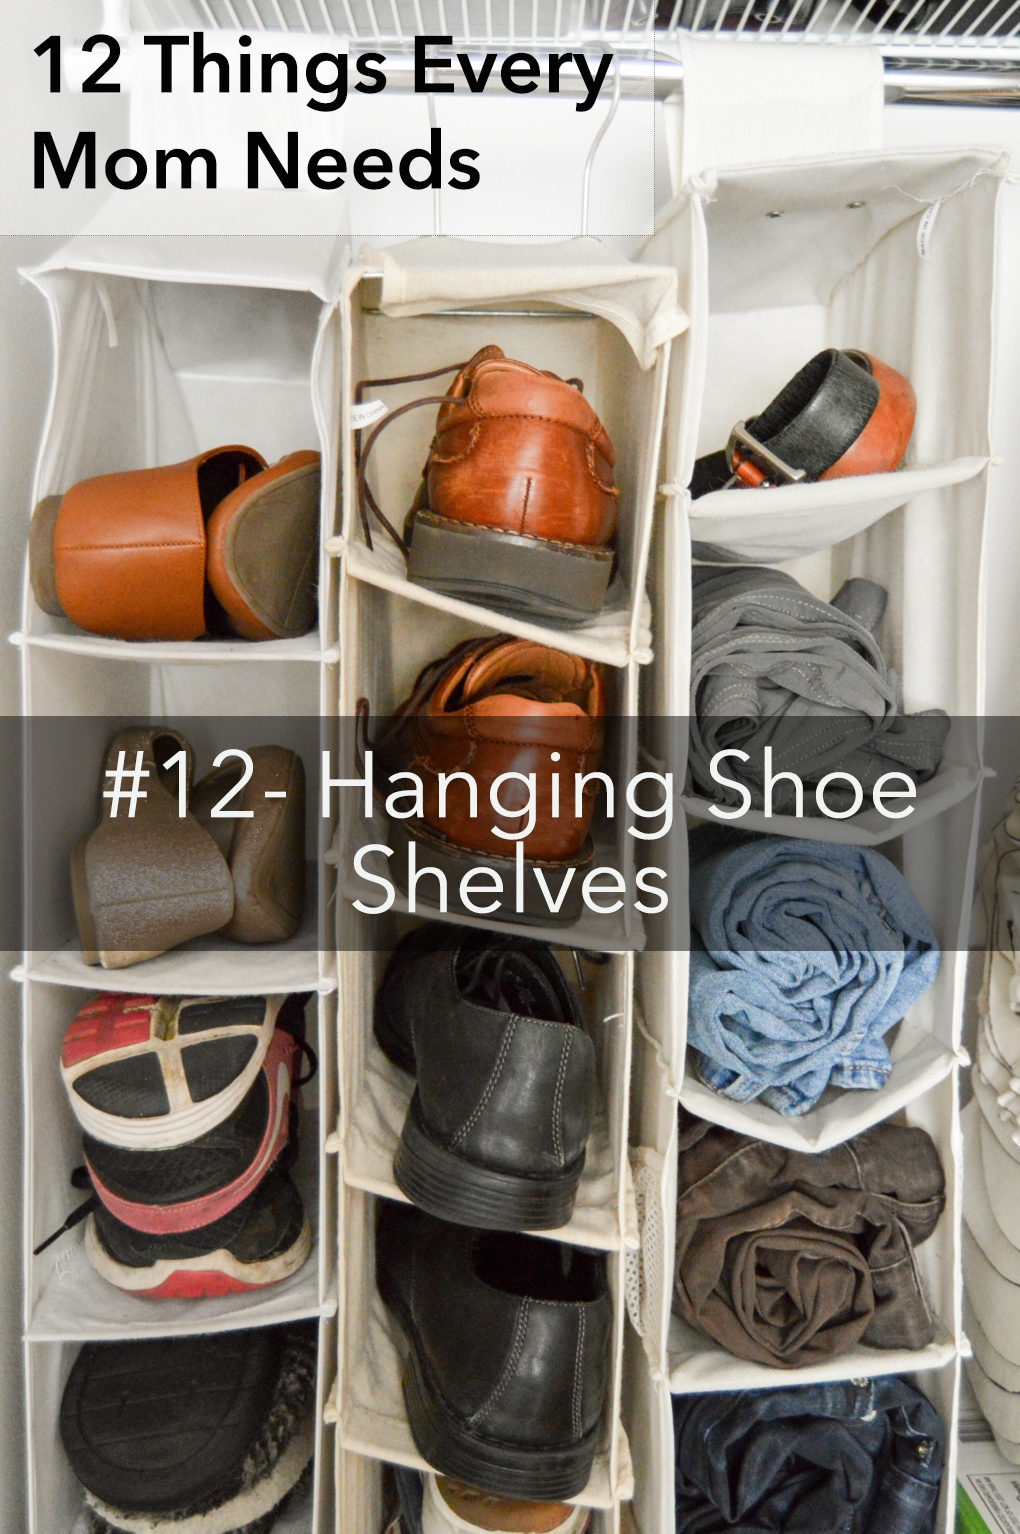 #12- hanging shoe shelves organizer. List of 12 household things every mom needs. Gift ideas for mom. What a new mom needs.